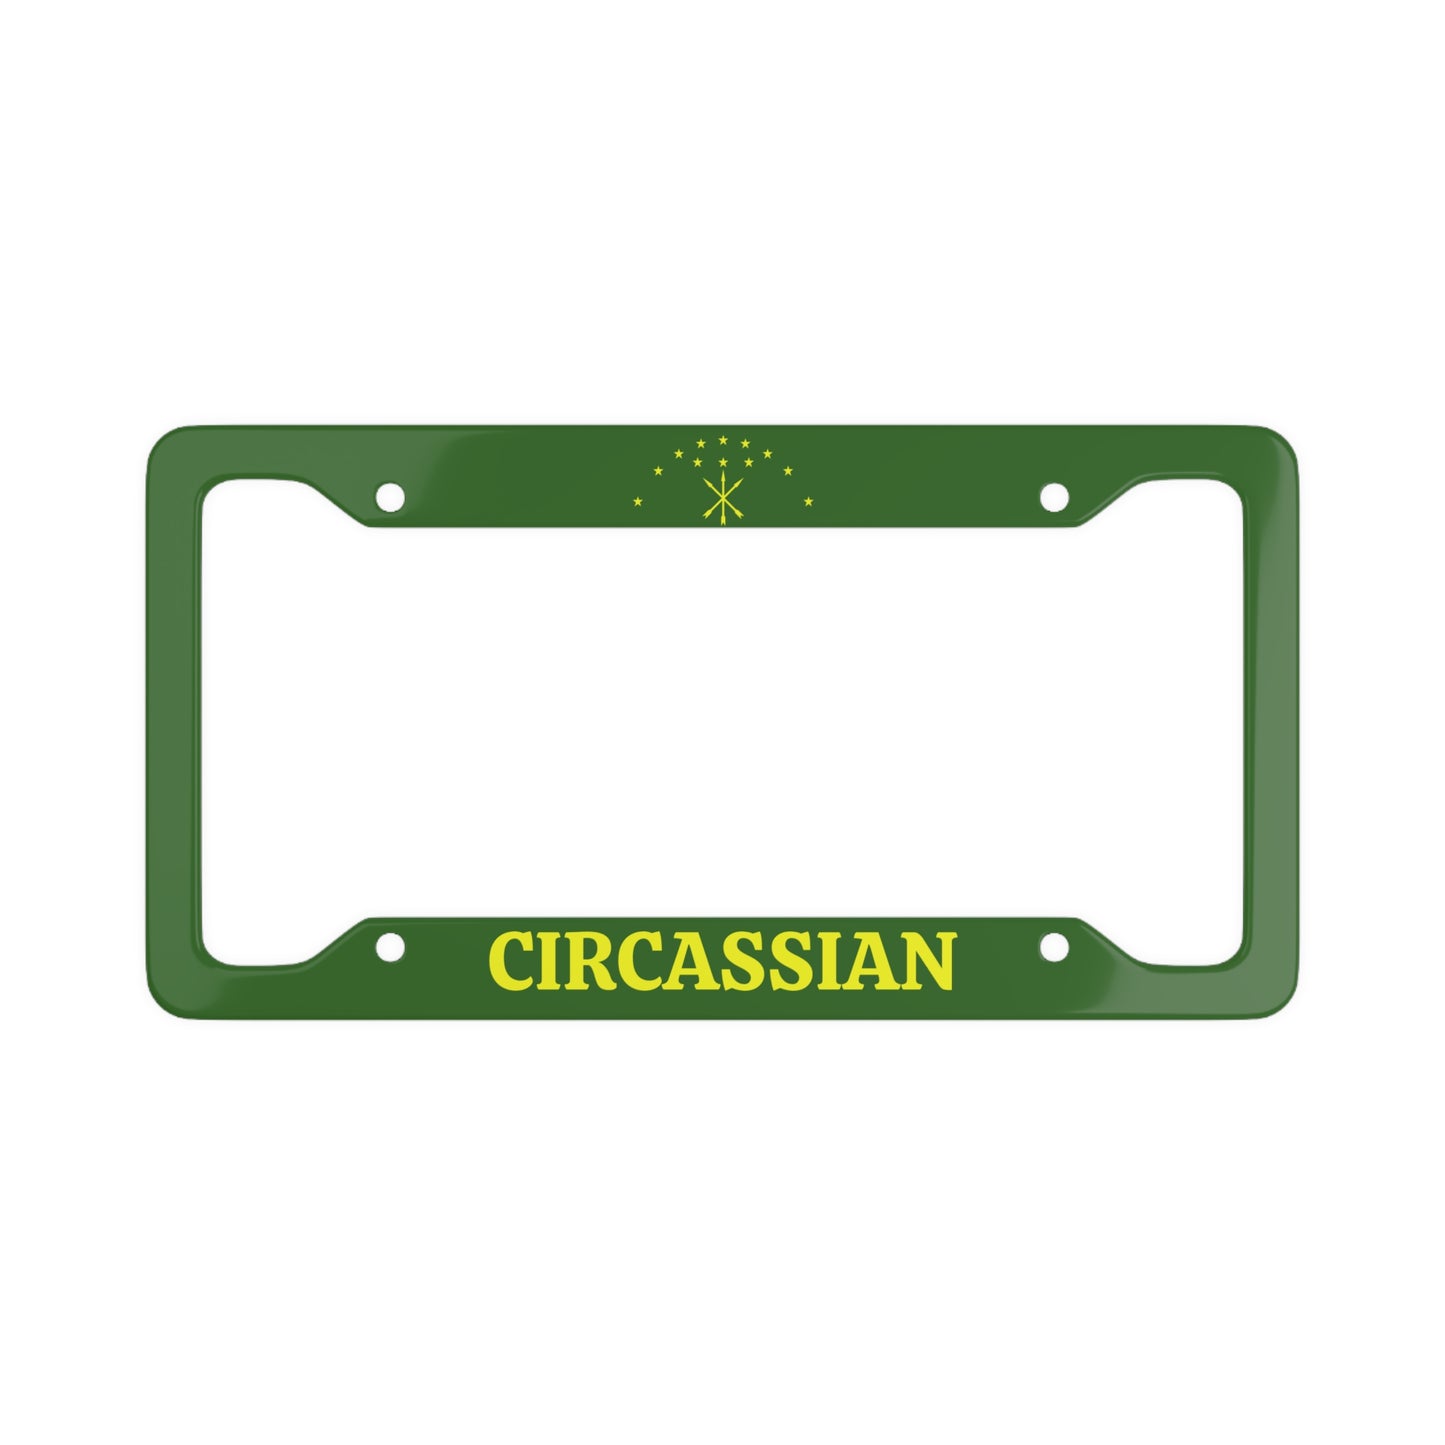 Circassian Colorful License Plate Frame